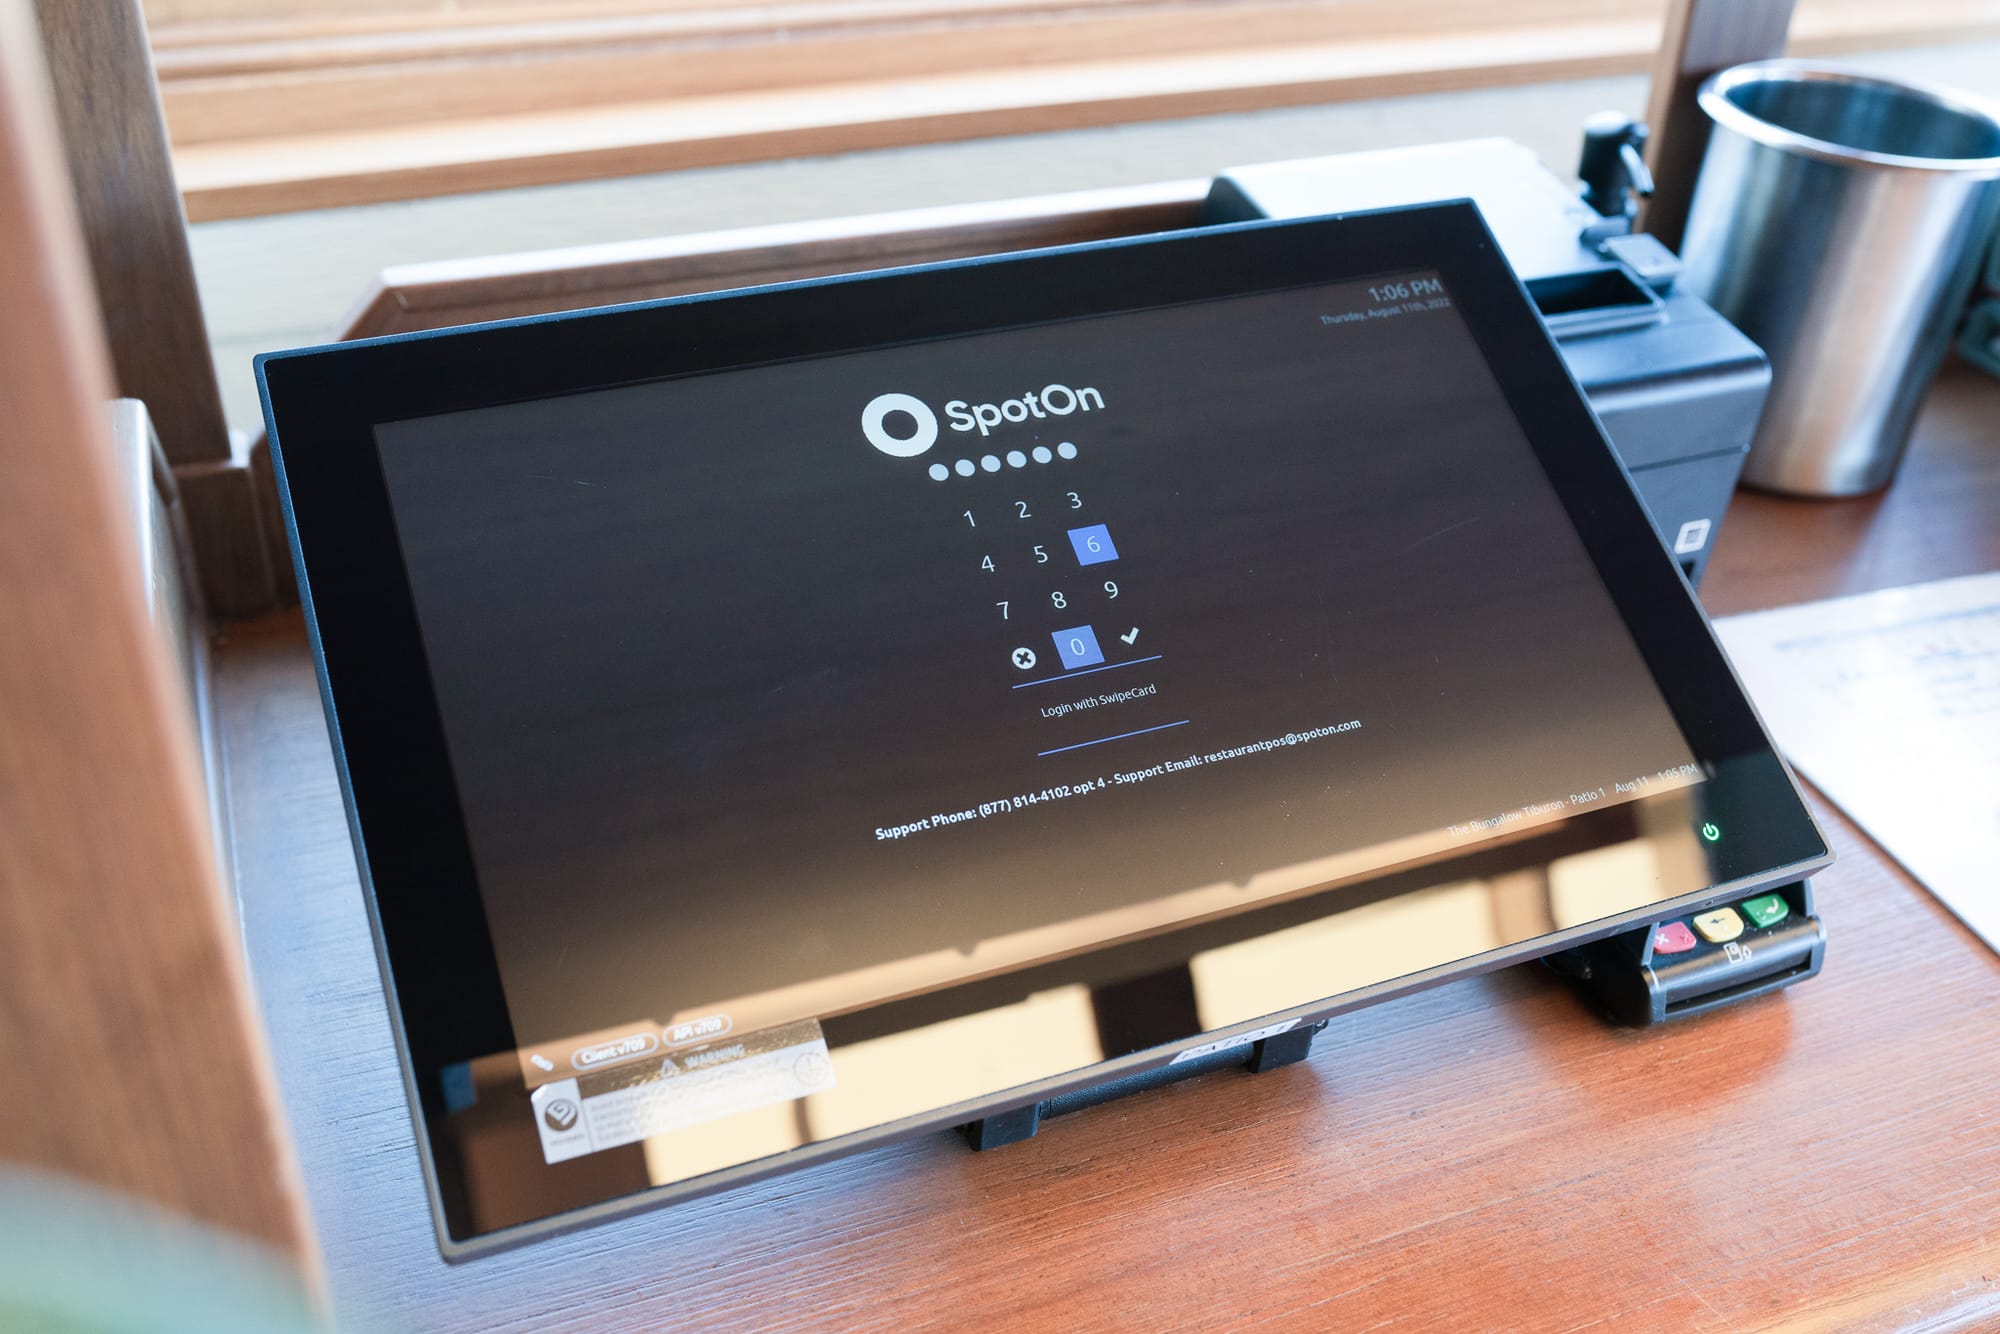 POS system point-of-sale in restaurant business touchscreen for streamline operations